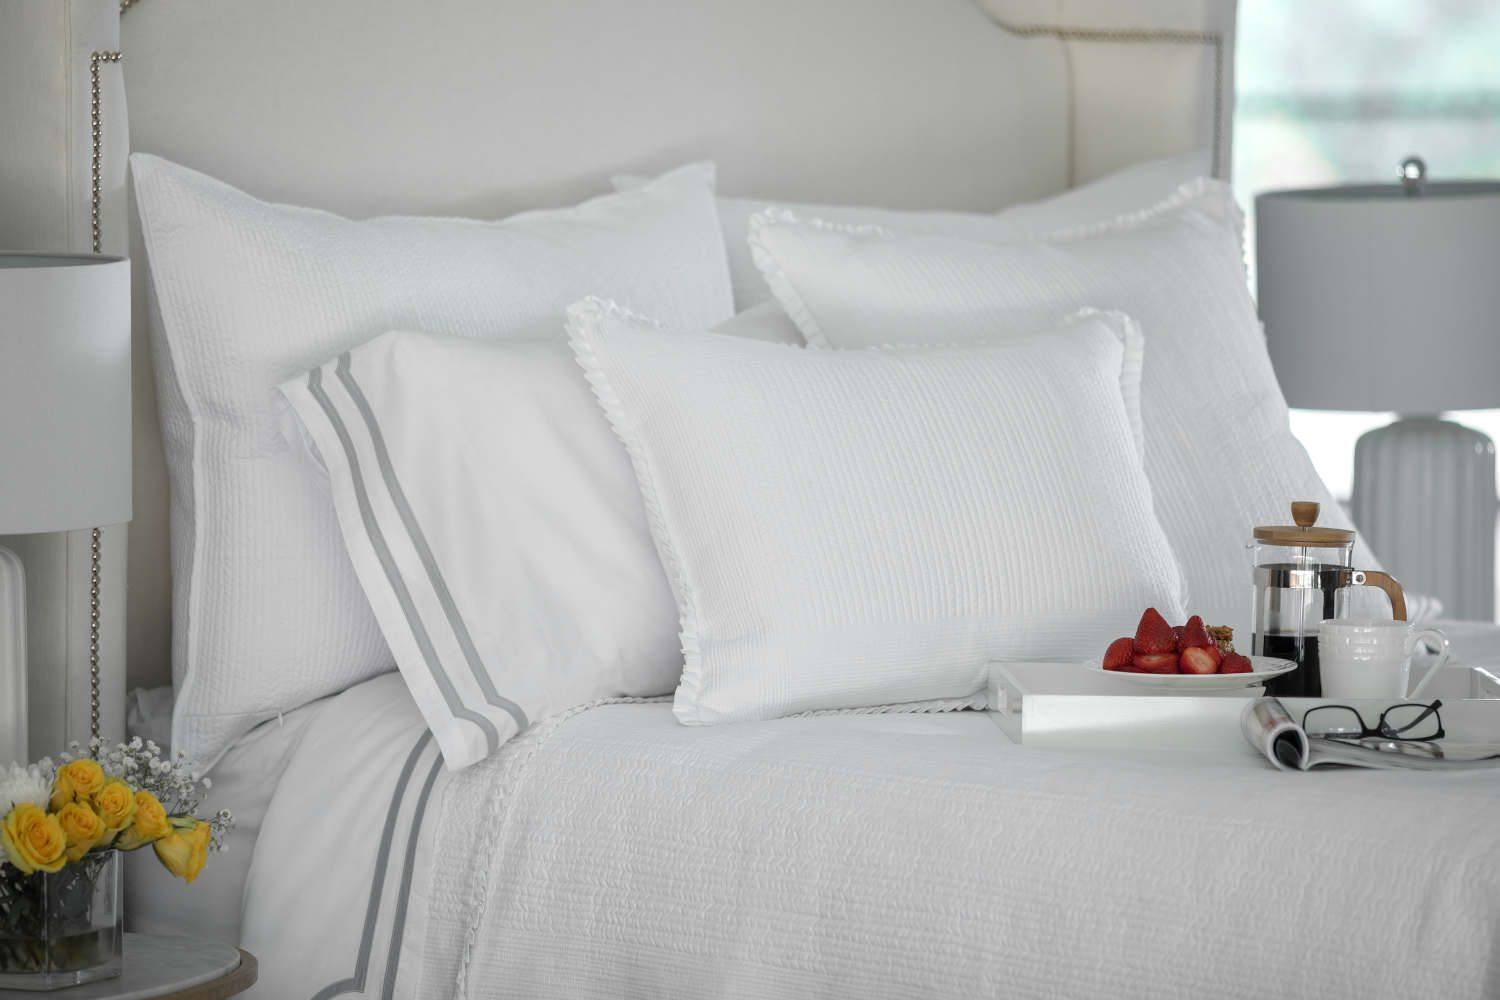 Lili Alessandra Battersea White Cotton Quilted Coverlets And Pillows